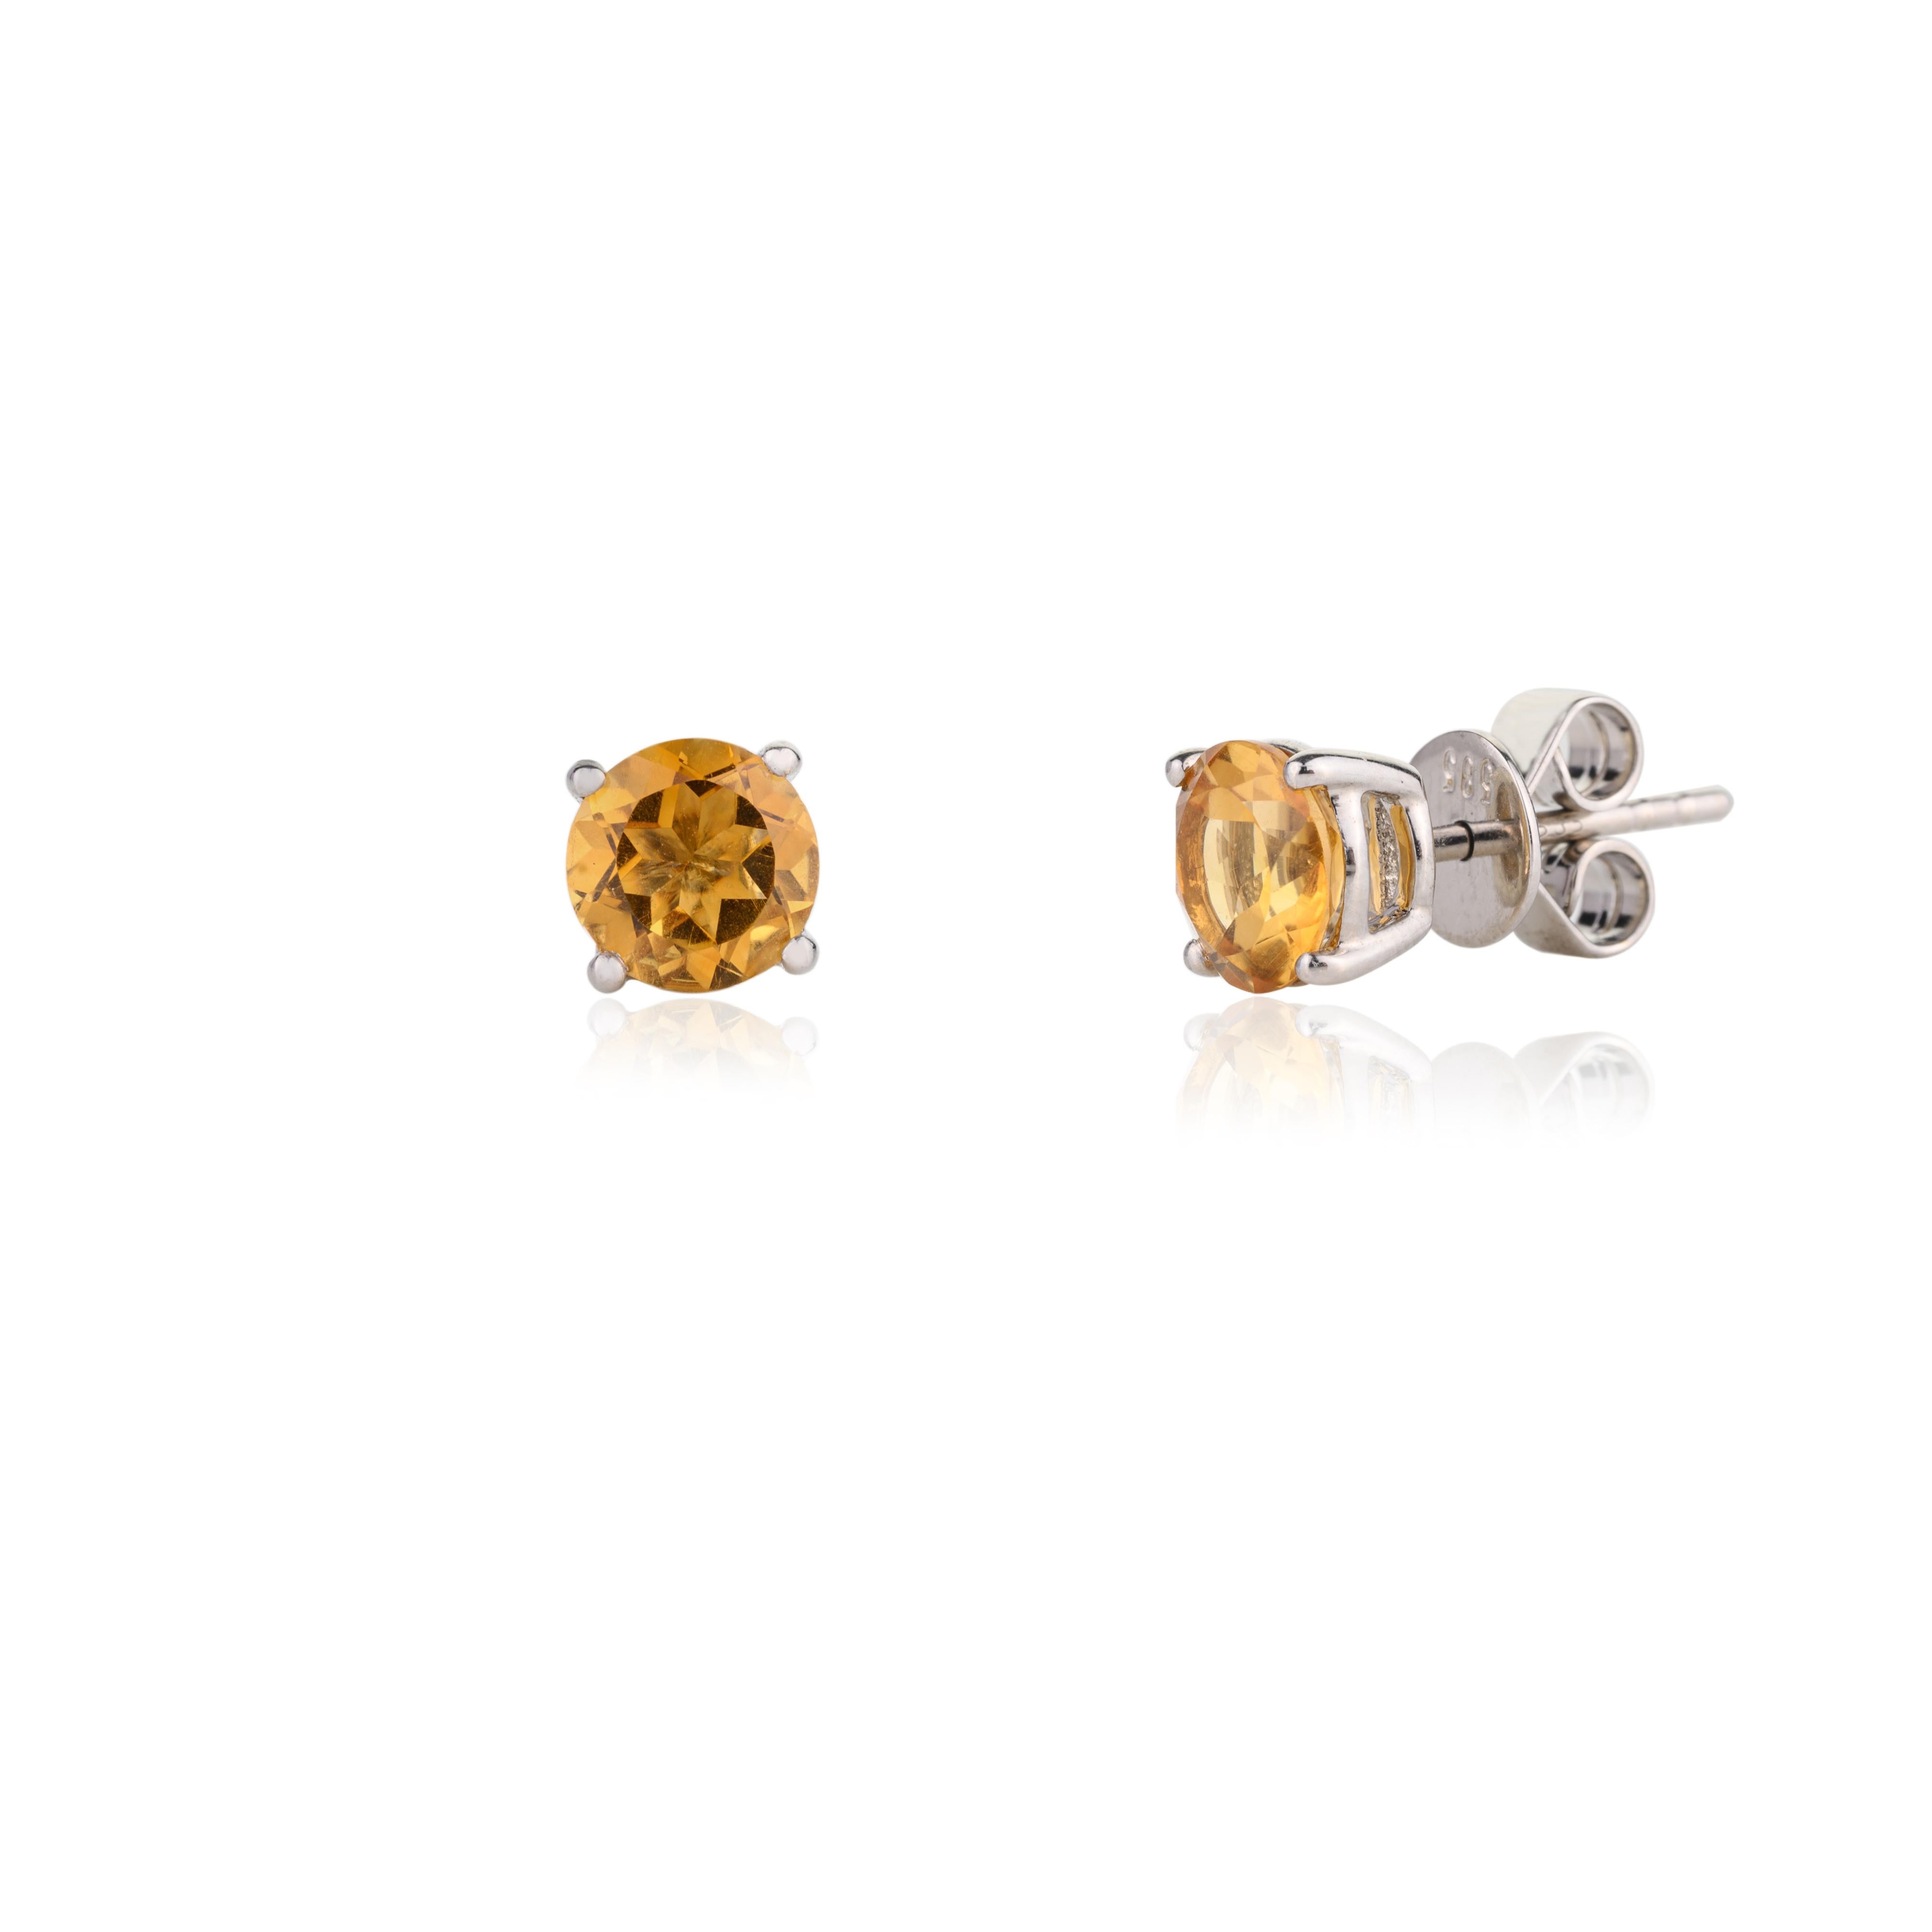 Women's Faceted Citrine Solitaire Stud Earrings in 14k White Gold Gift for Her For Sale